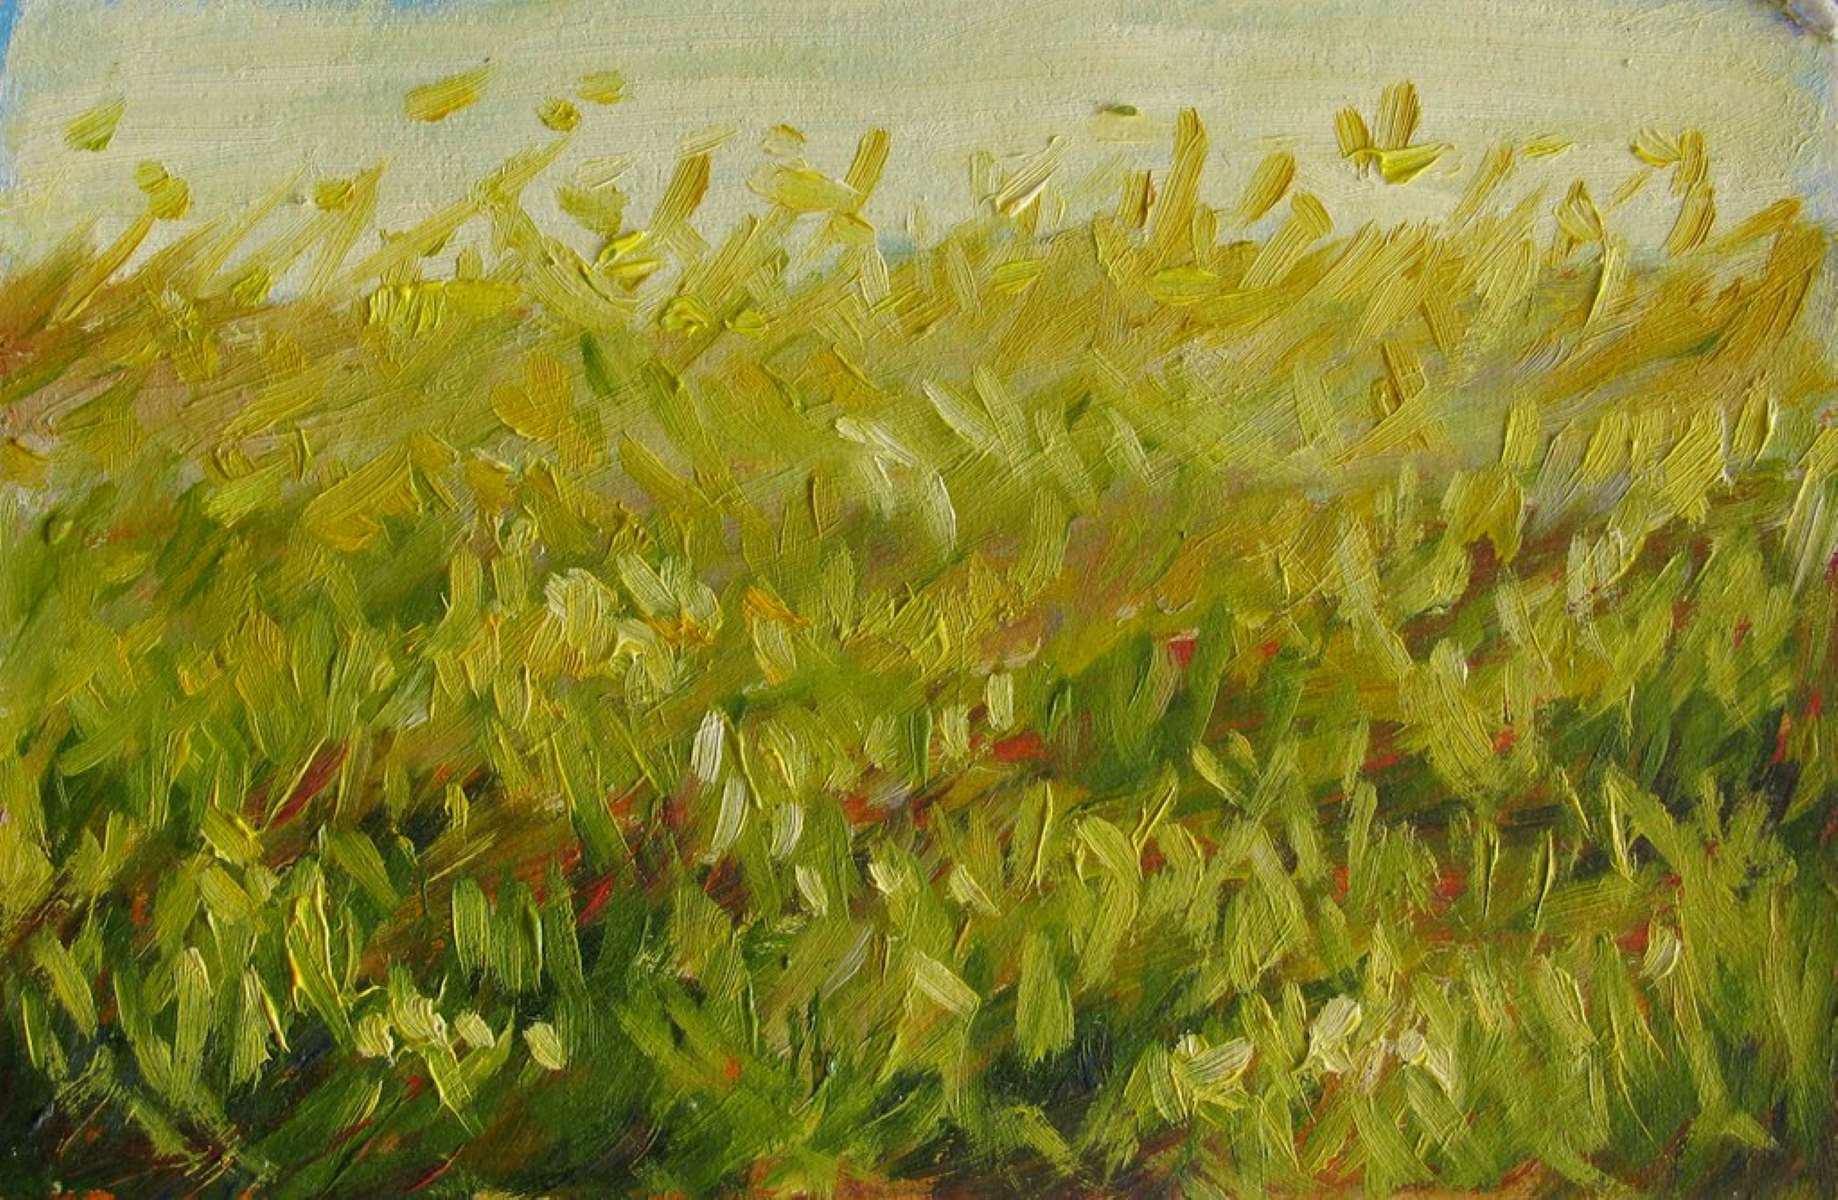 How To Paint Grass In Oil